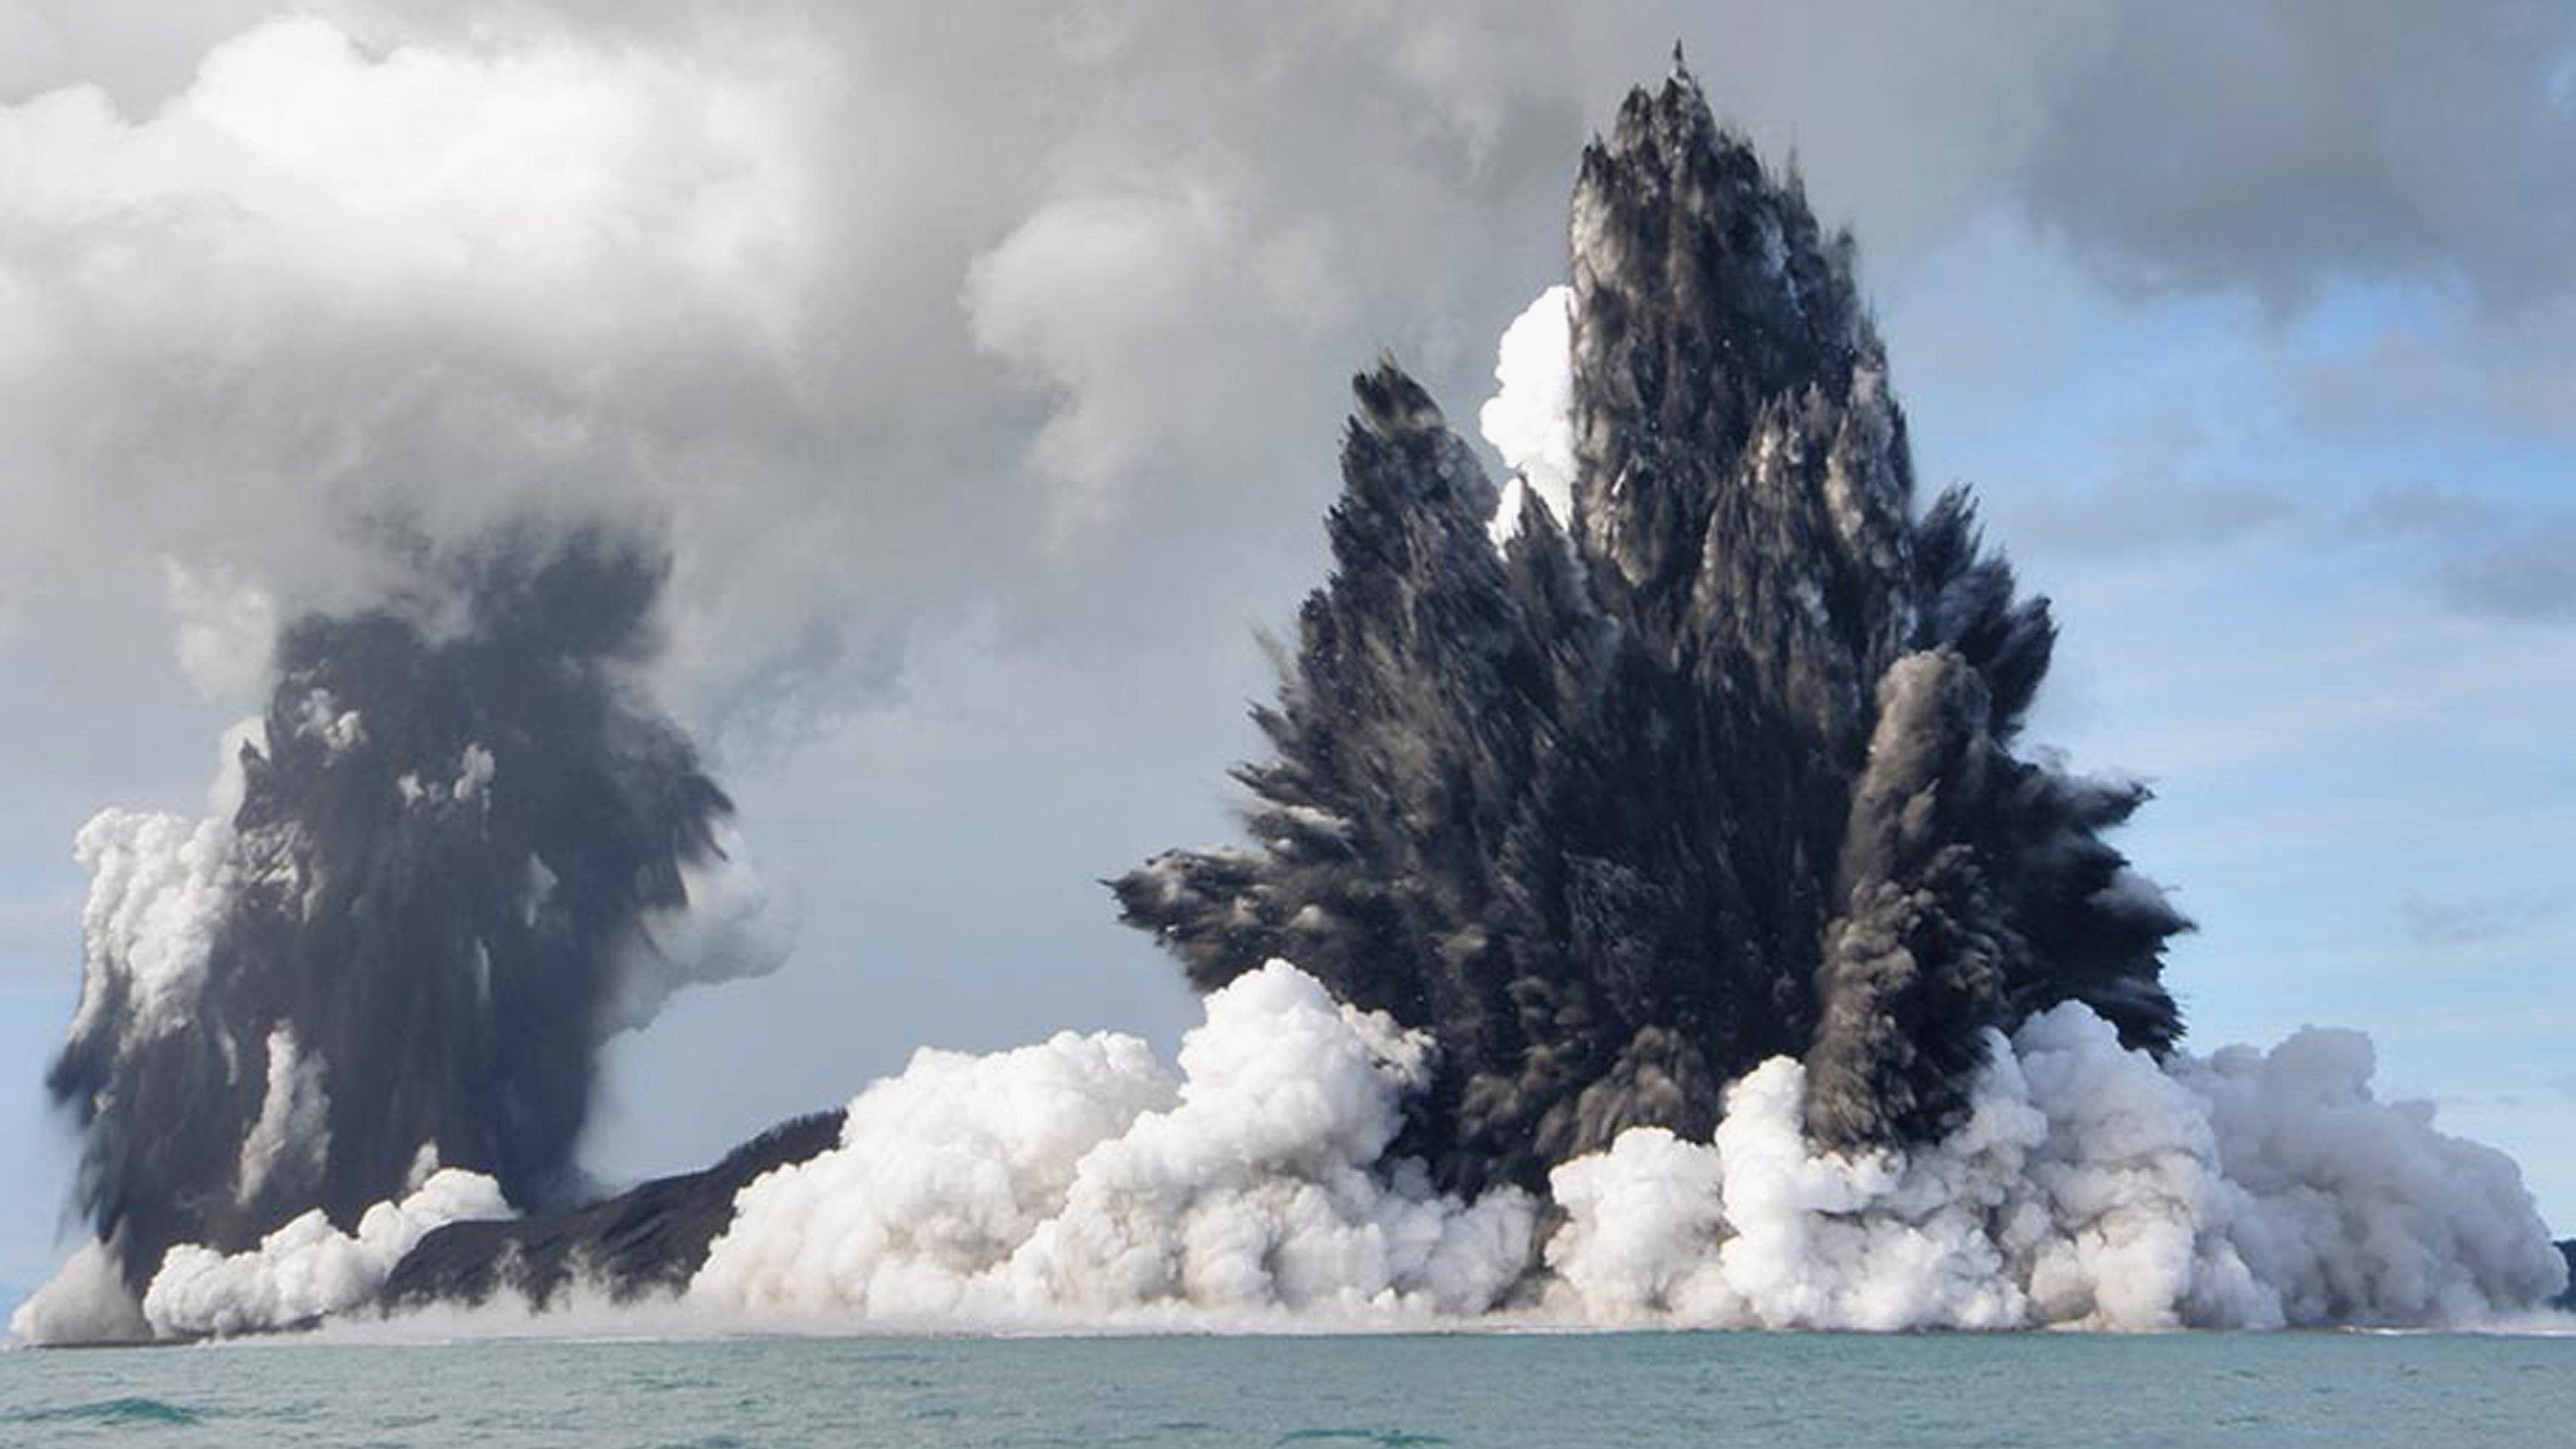 That&;s No Bomb - It&;s an Underwater Volcano (PHOTOS). The Weather Channel from The Weather Channel